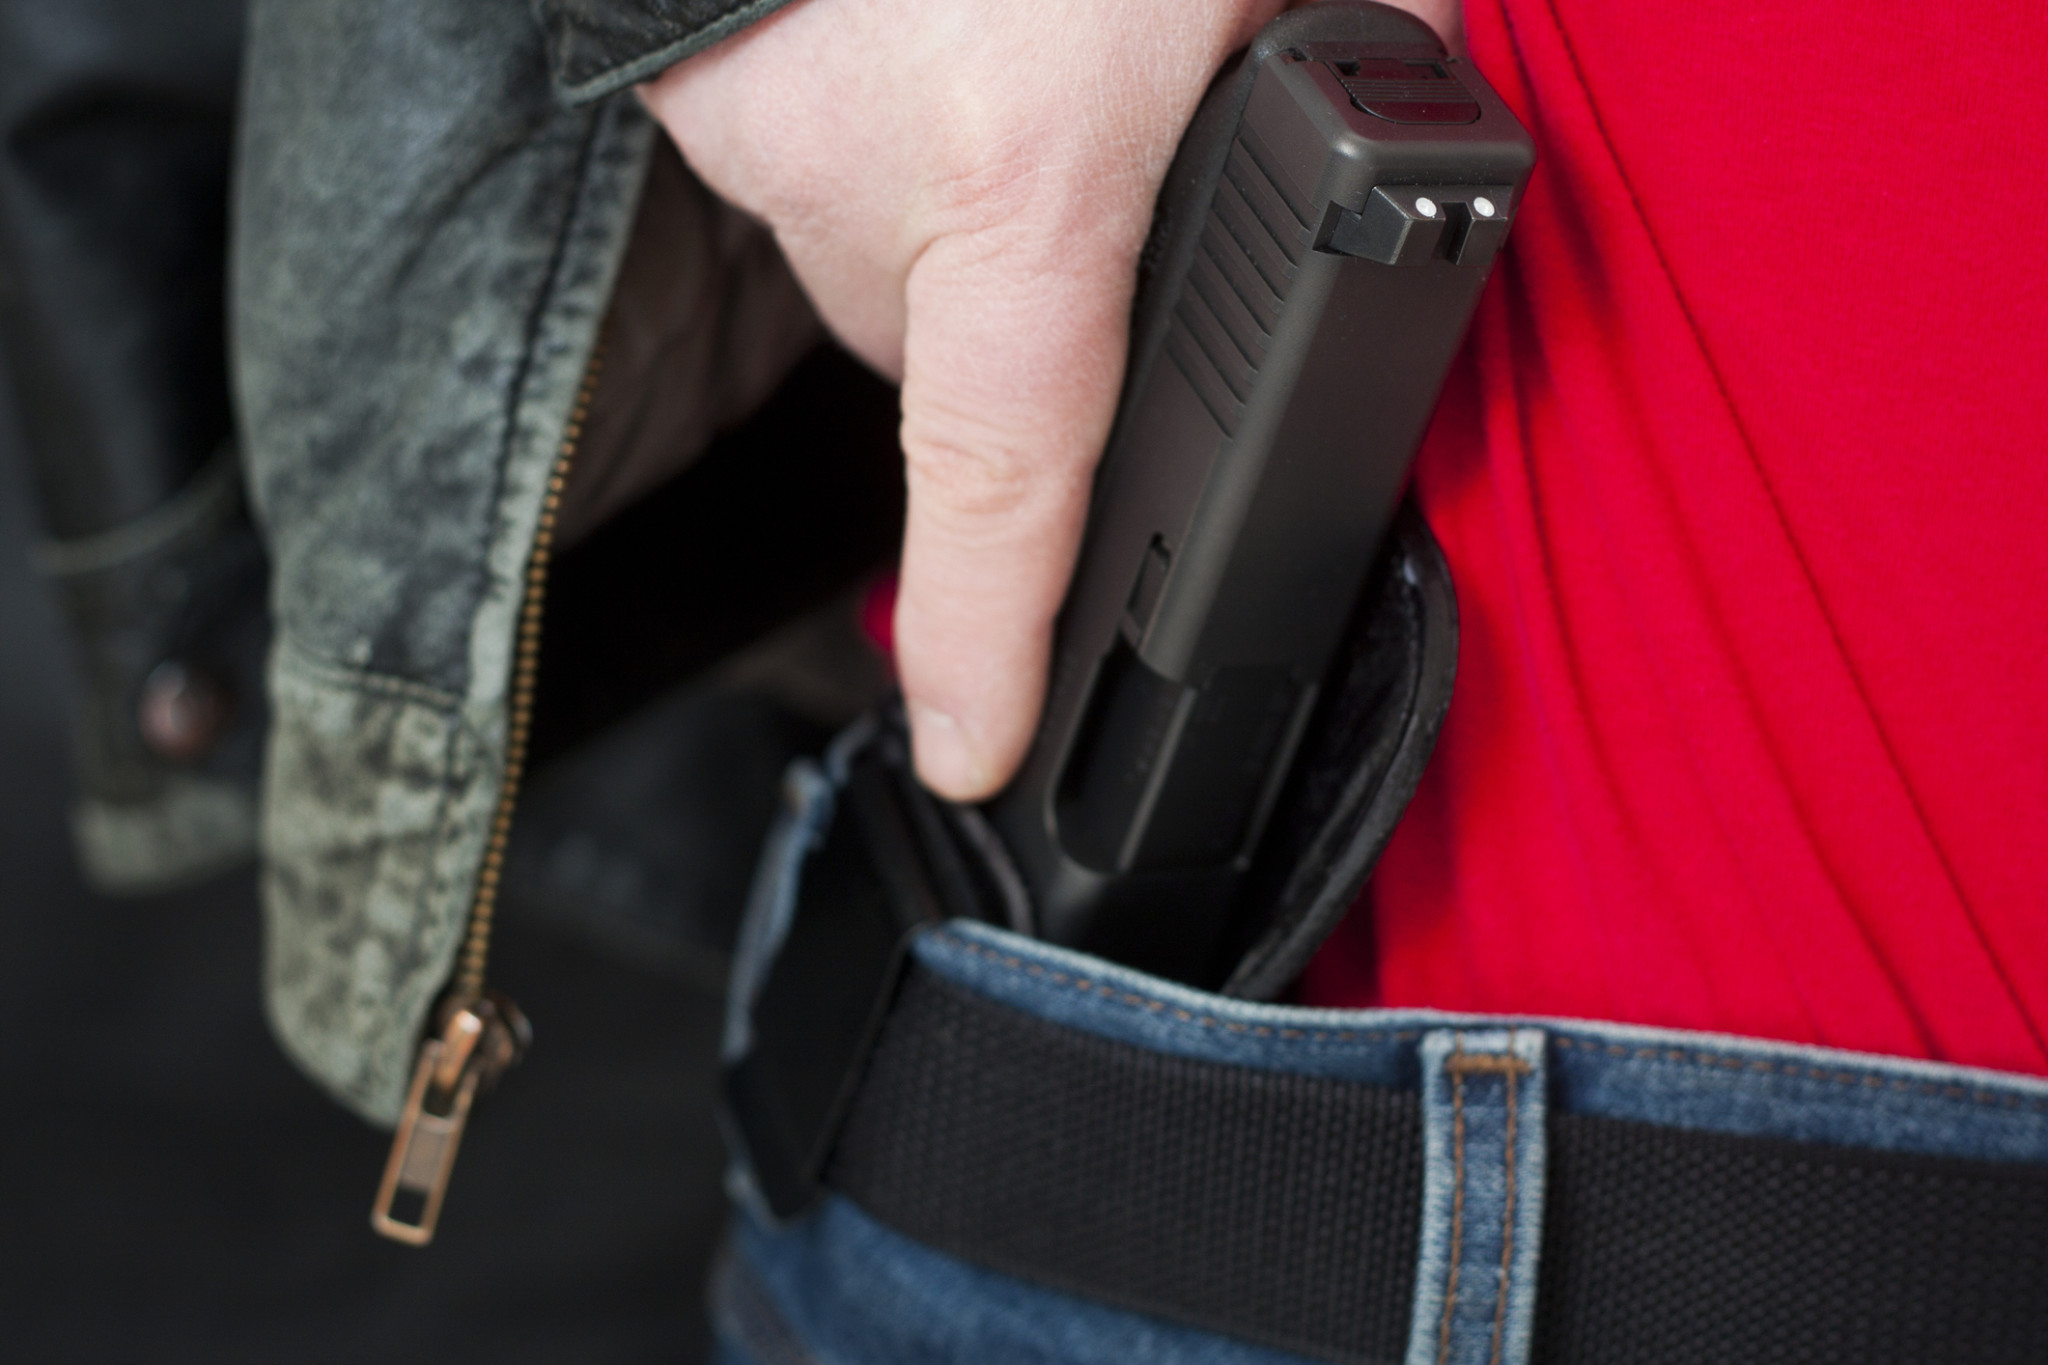 firearm and concealed weapon coverage